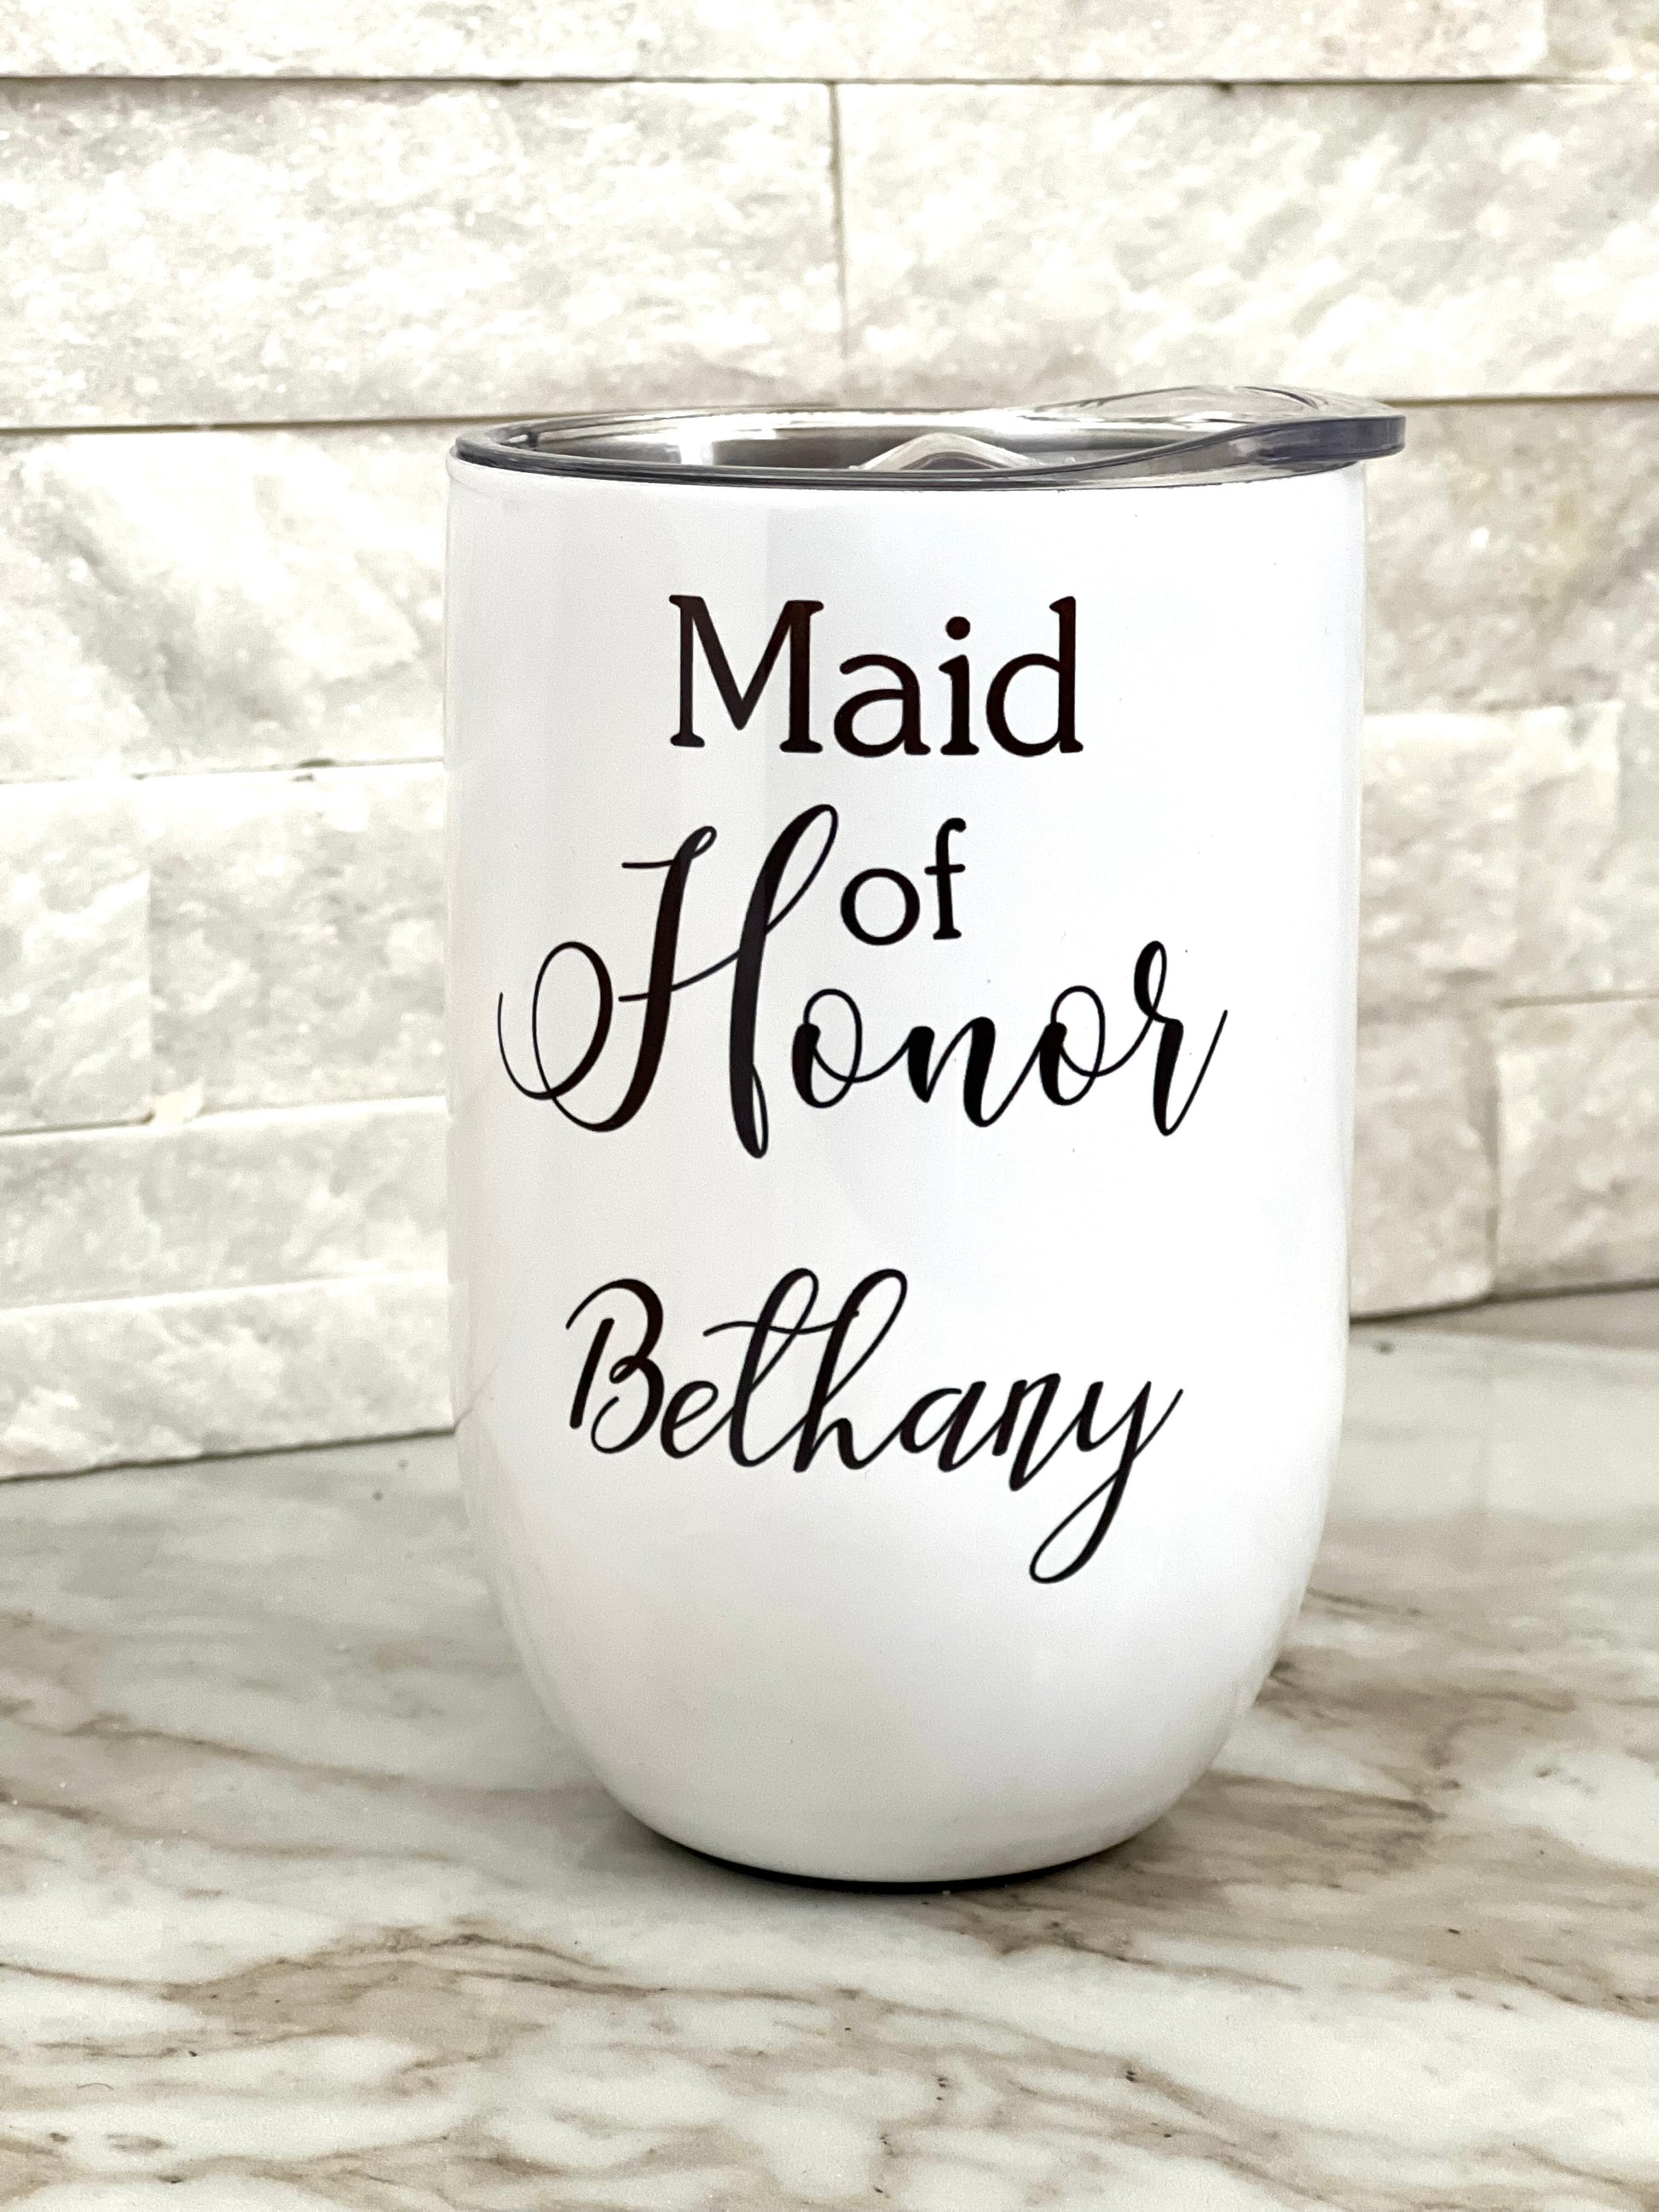 We know how important and special it is to gift the maid of honour a unique gift that she can keep forever. That's why, we've got you covered with our personalization-friendly wine tumbler! A white  wine tumbler in its form and function, this can be personalized with your maid of honours' name. Great for serving wine out of as well as storing your favourite drink, this tumbler comes highly recommended by us.